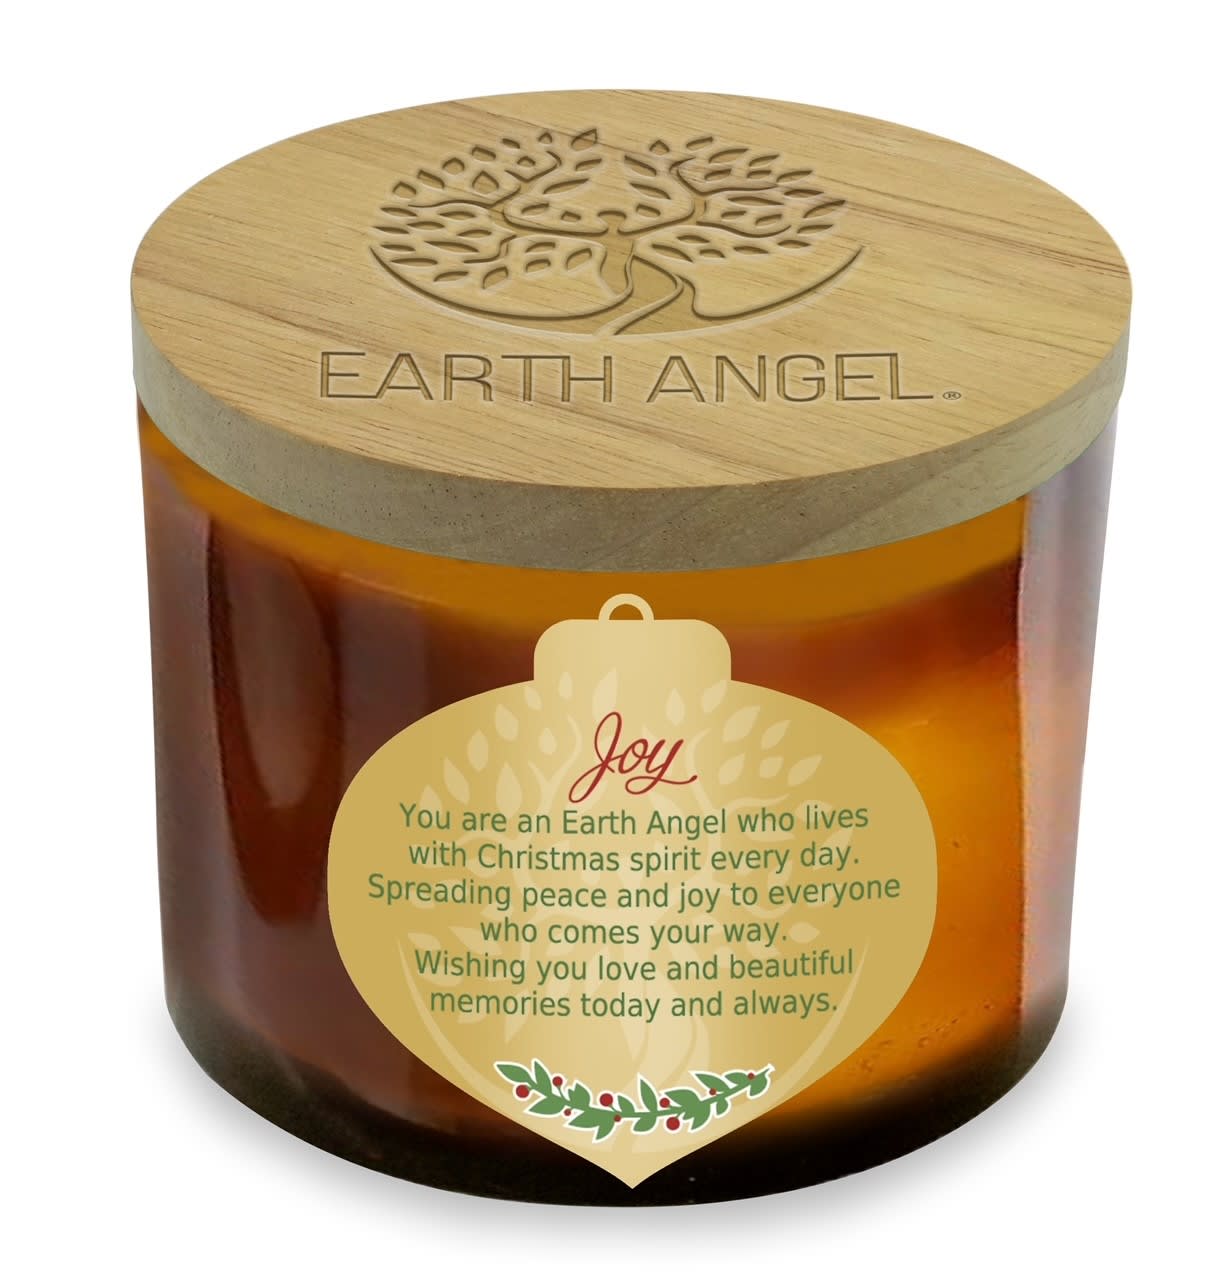 Joy Ornament Candle by Earth Angel - This 12 Ounce 2 wick lead free candle made with natural soy. Measures 4 3/8&quot;Wide and 3 1/4&quot; High crafted with a wood embossed lid. Clean burning and soot free with a pleasant Christmas Cookie fragrance. Will burn for over 35 hours. Joy- You are an Earth Angel who lives with Christmas spirit every day. Spreading peace and joy to everyone who comes your way. Wishing you love and beautiful memories today and always.